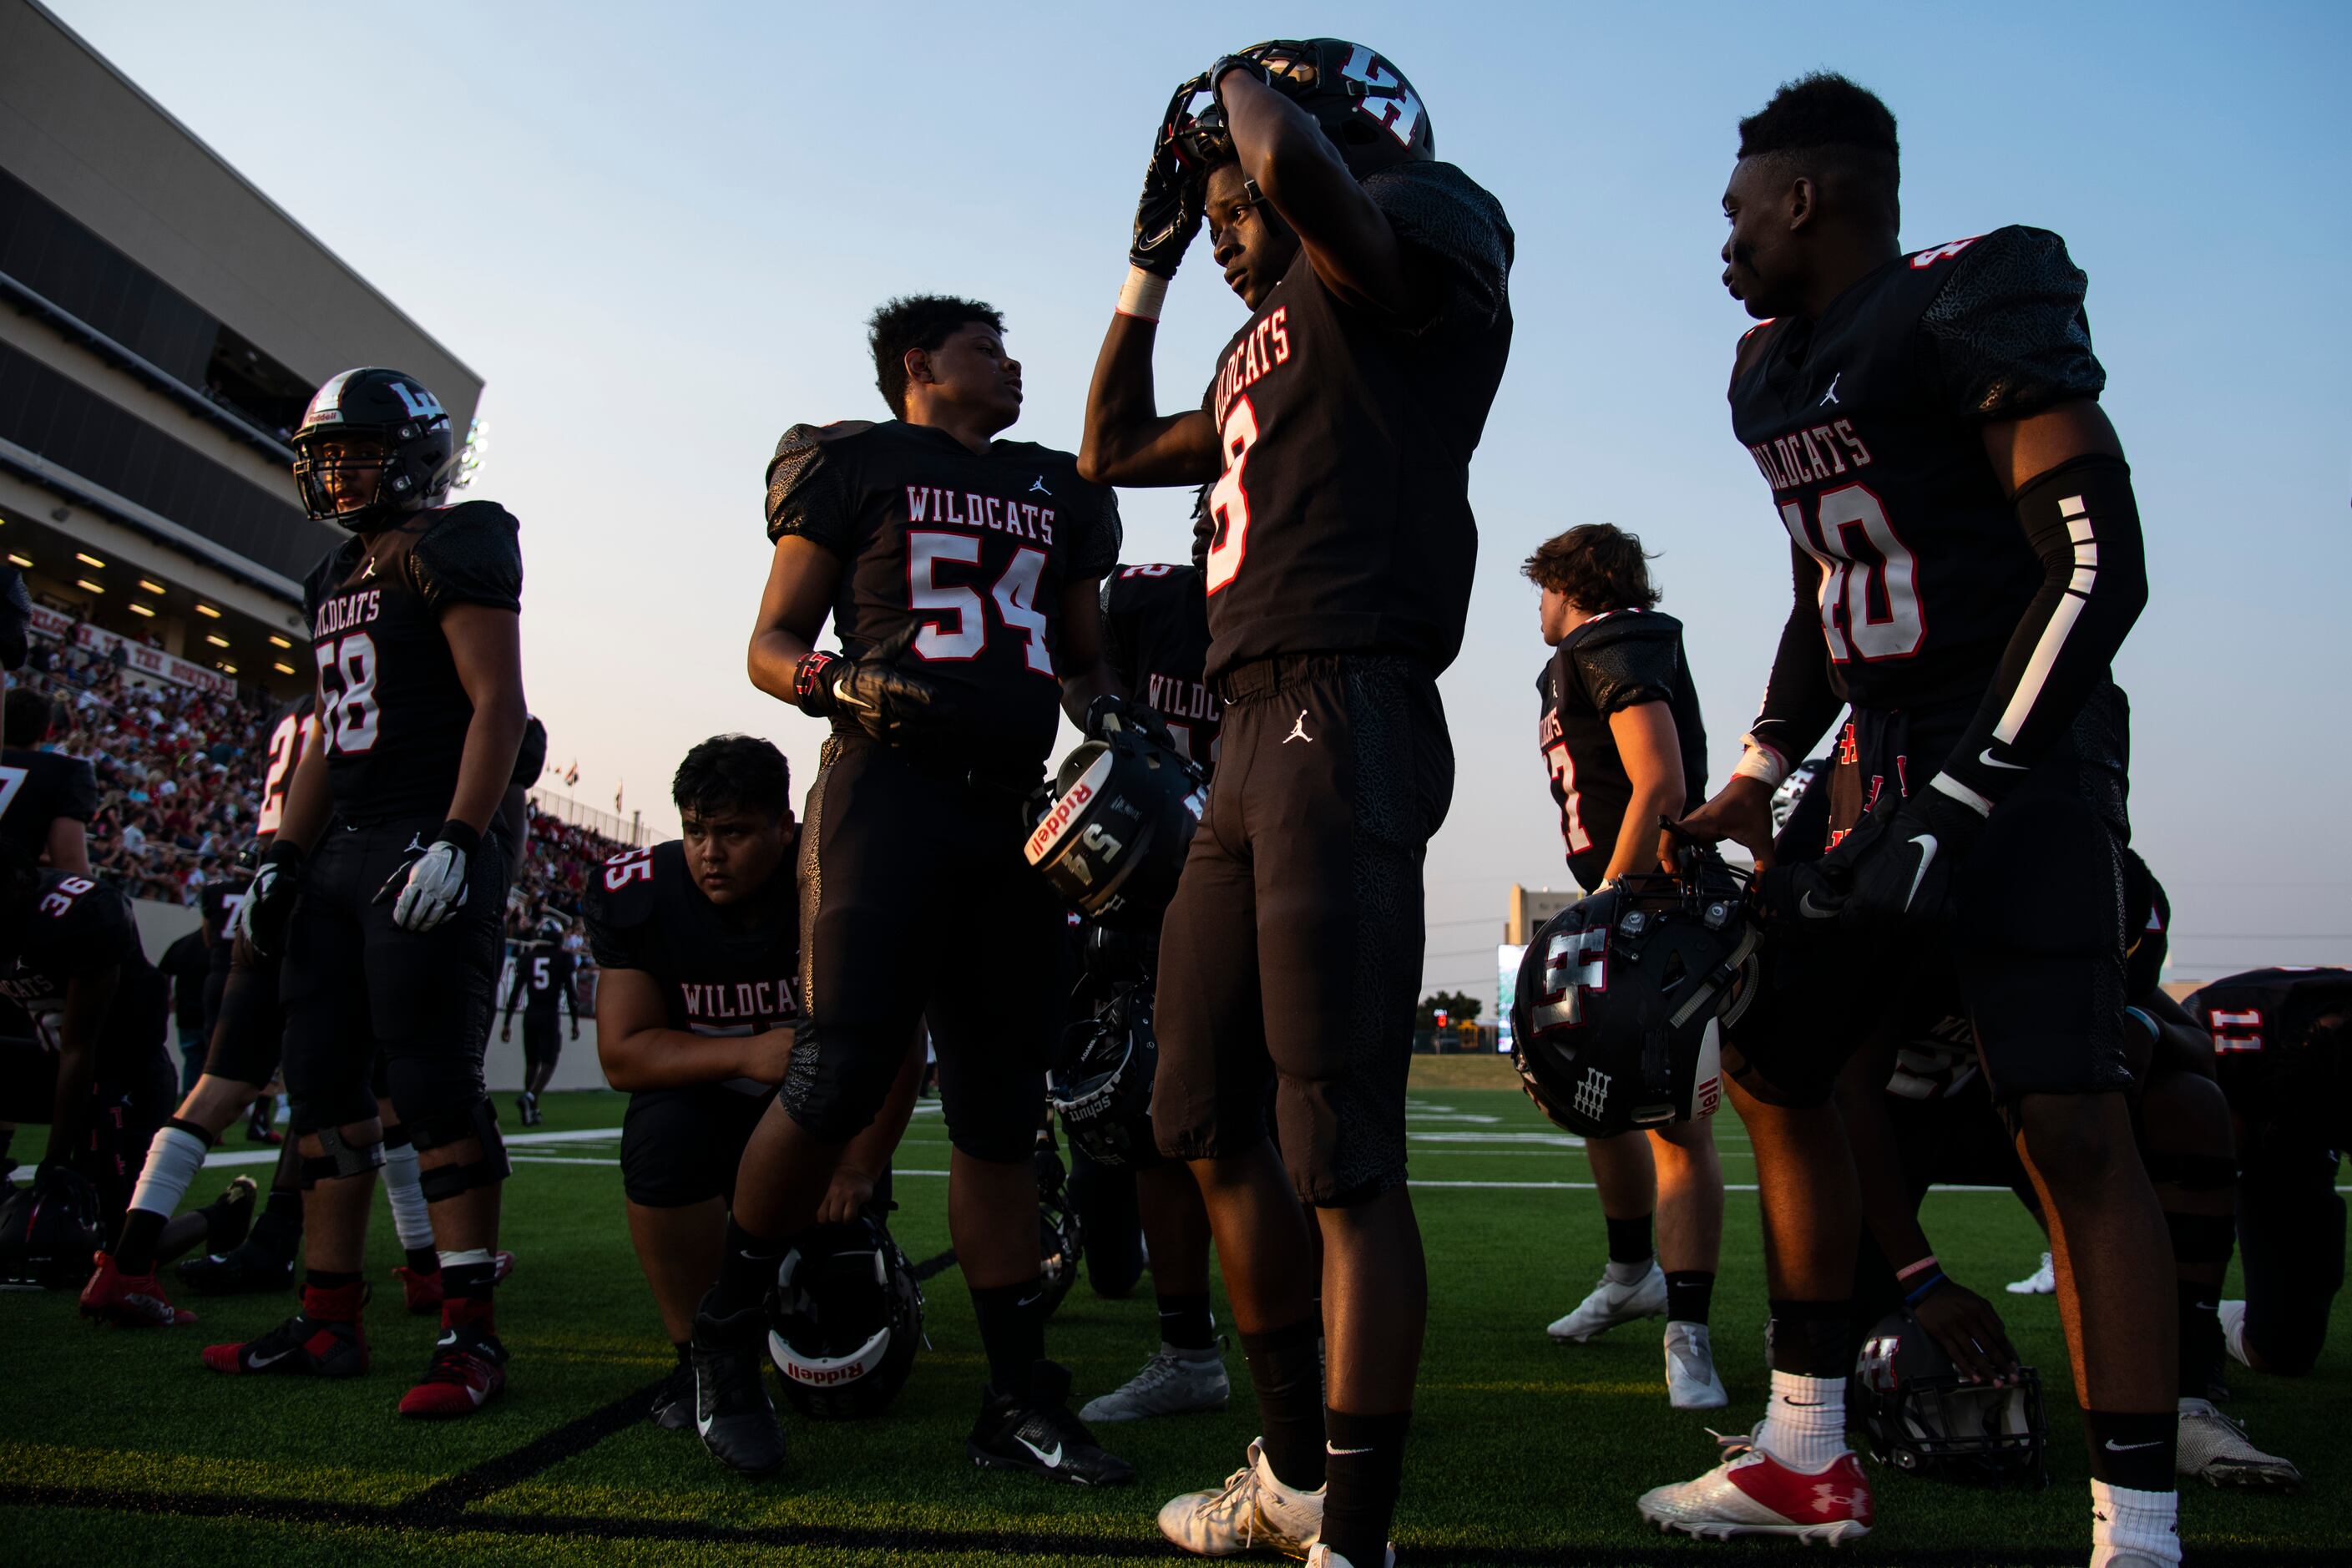 Lake Highlands sophomore Miron Magee (8) puts on his helmet after saying a prayer prior to...